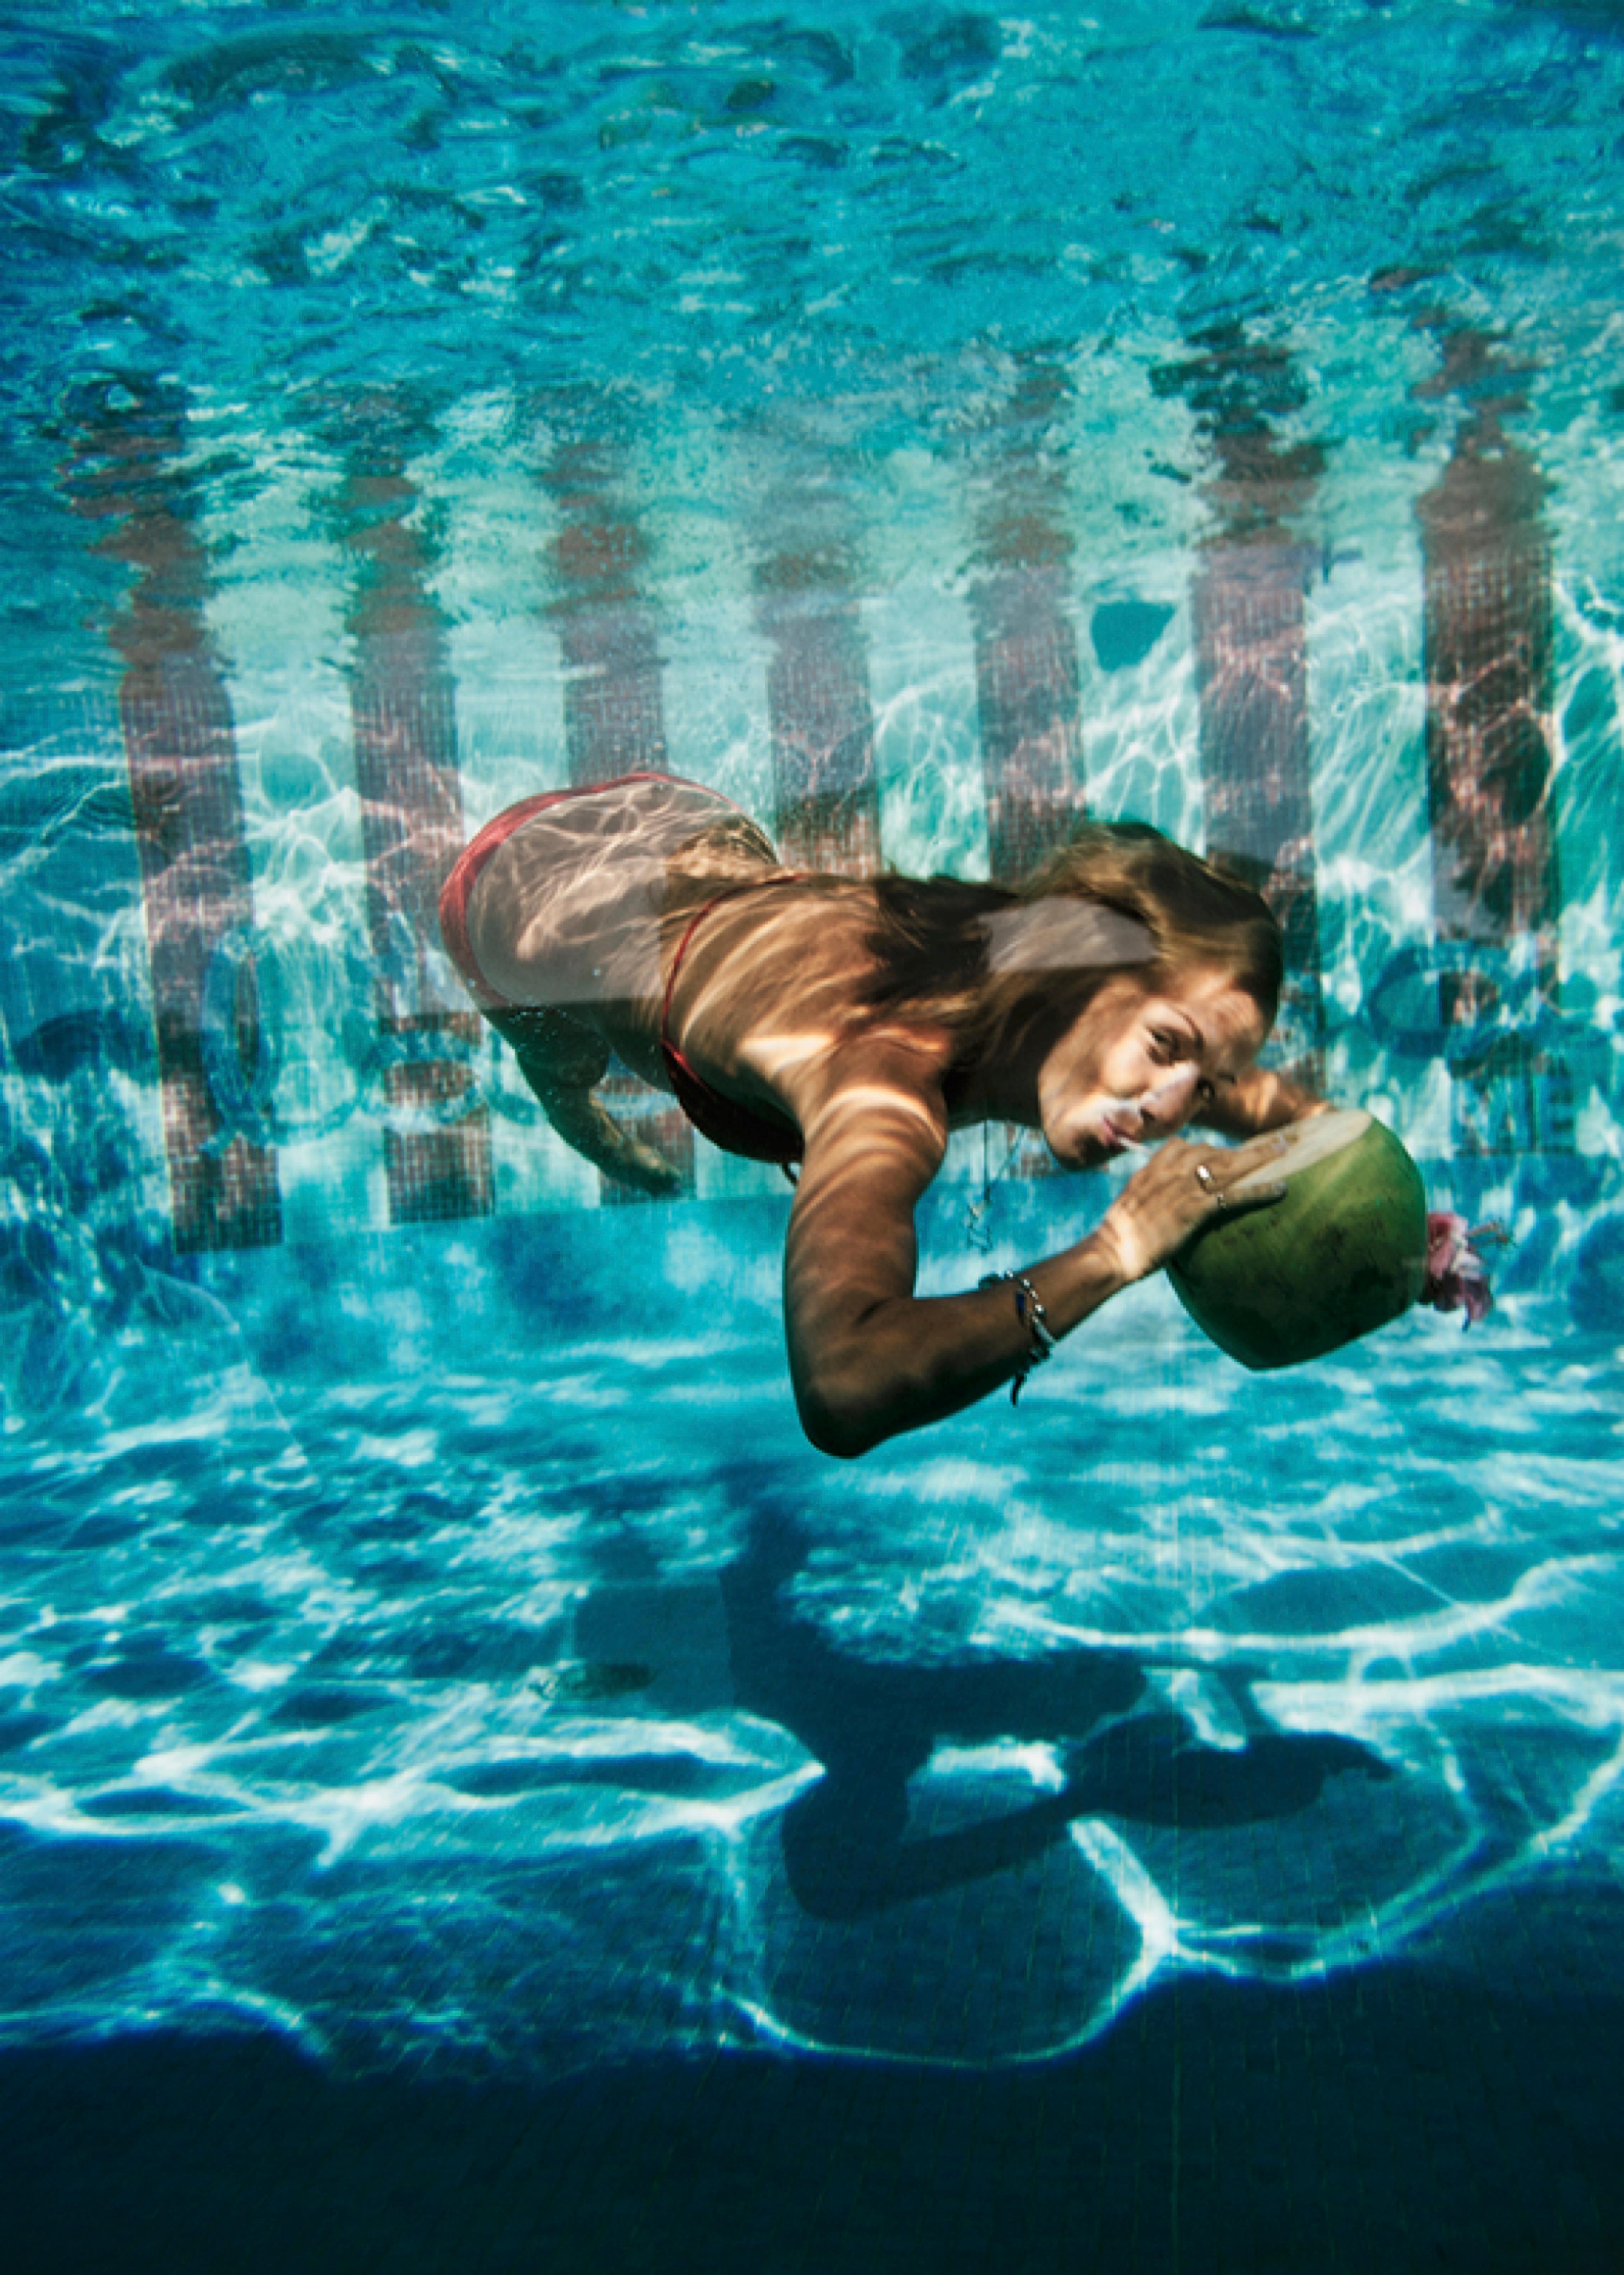 Underwater Drink

1972

 A woman drinking from a coconut underwater in the pool at Las Brisas Hotel in Acapulco, Mexico, February 1972.

By Slim Aarons

60 x 40” / 152 x 101 cm - paper size 
C-Type Print
unframed 

Estate Stamped Edition 
Edition of